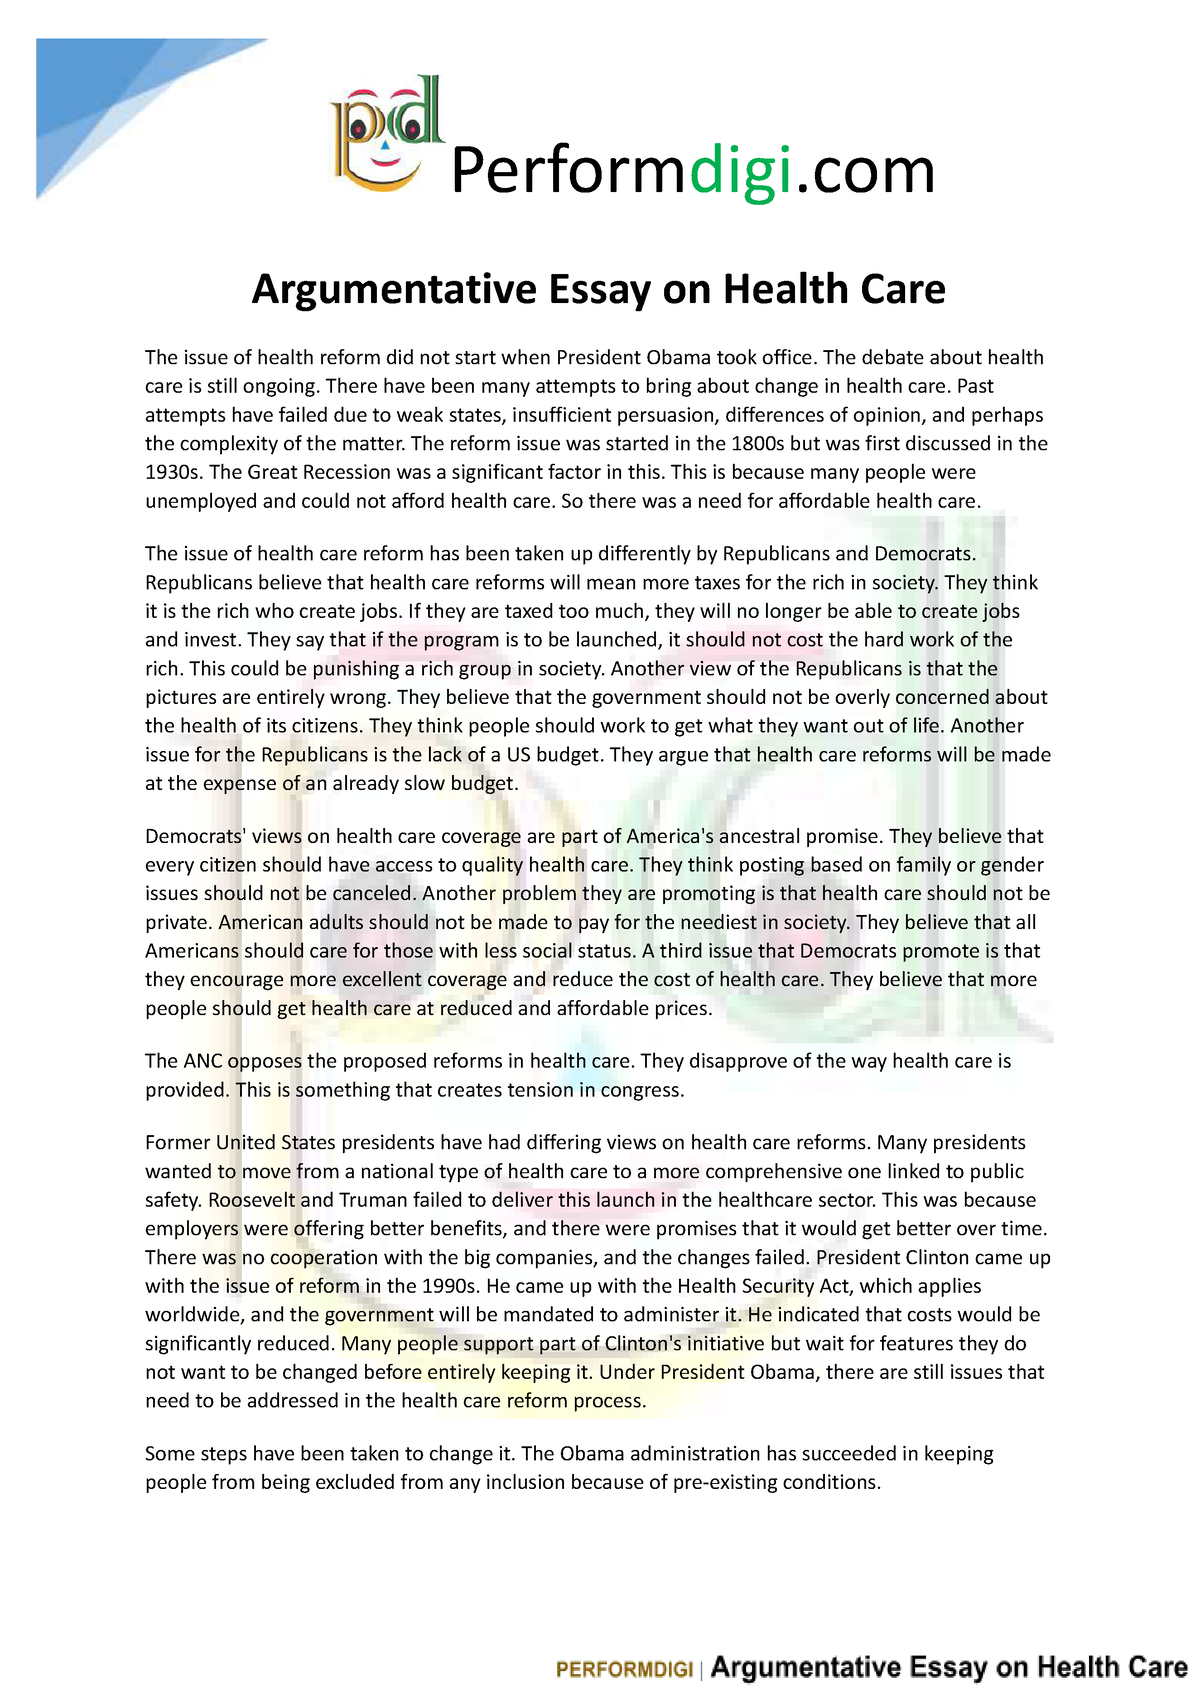 writing an argumentative essay about health care quizlet